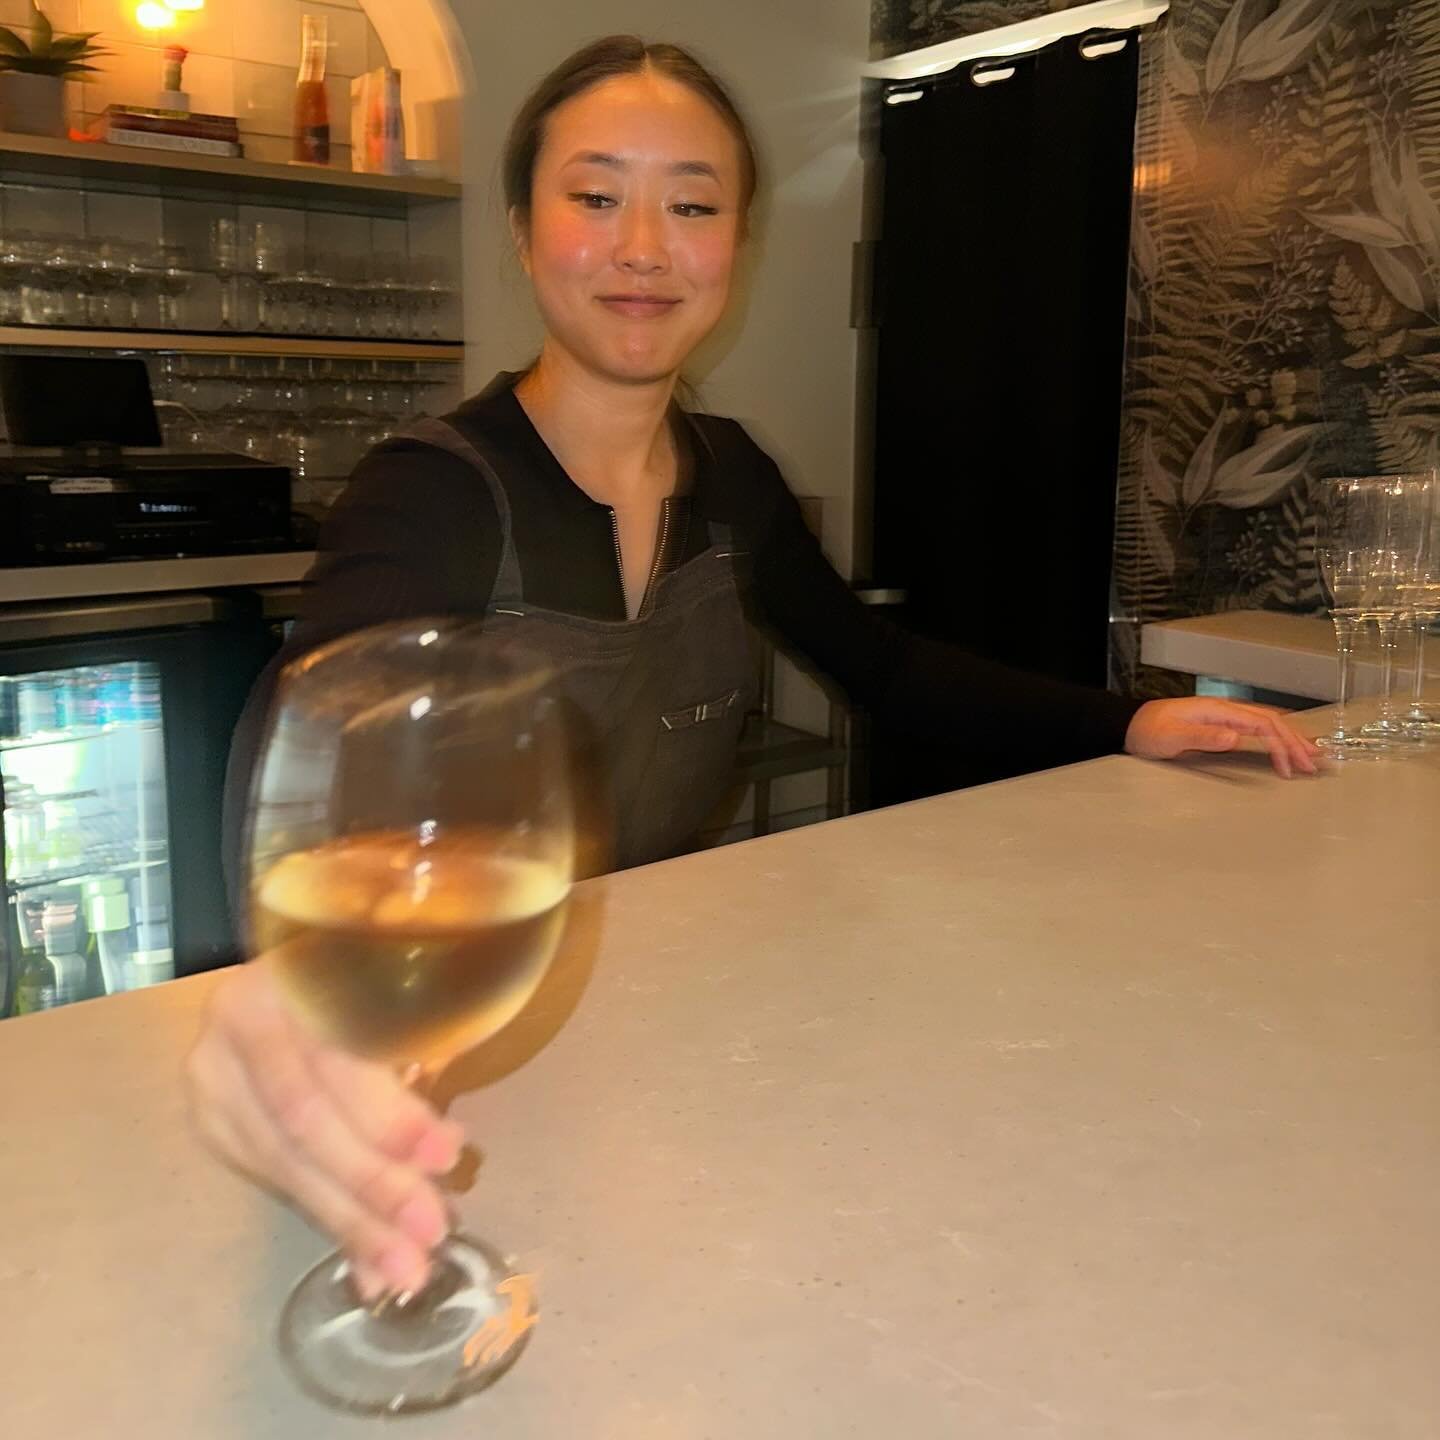 NO CORKAGE FEE during Happy Hour!? 😱 Yes plz! 🥂 

Monday to Friday from 4pm-7pm enjoy our small plates, wine, &amp; beer specials! We&rsquo;ve got smash burgers, oysters, Sisig tacos &amp; more yum for ya!

Tonight for #winewednesday we have an all